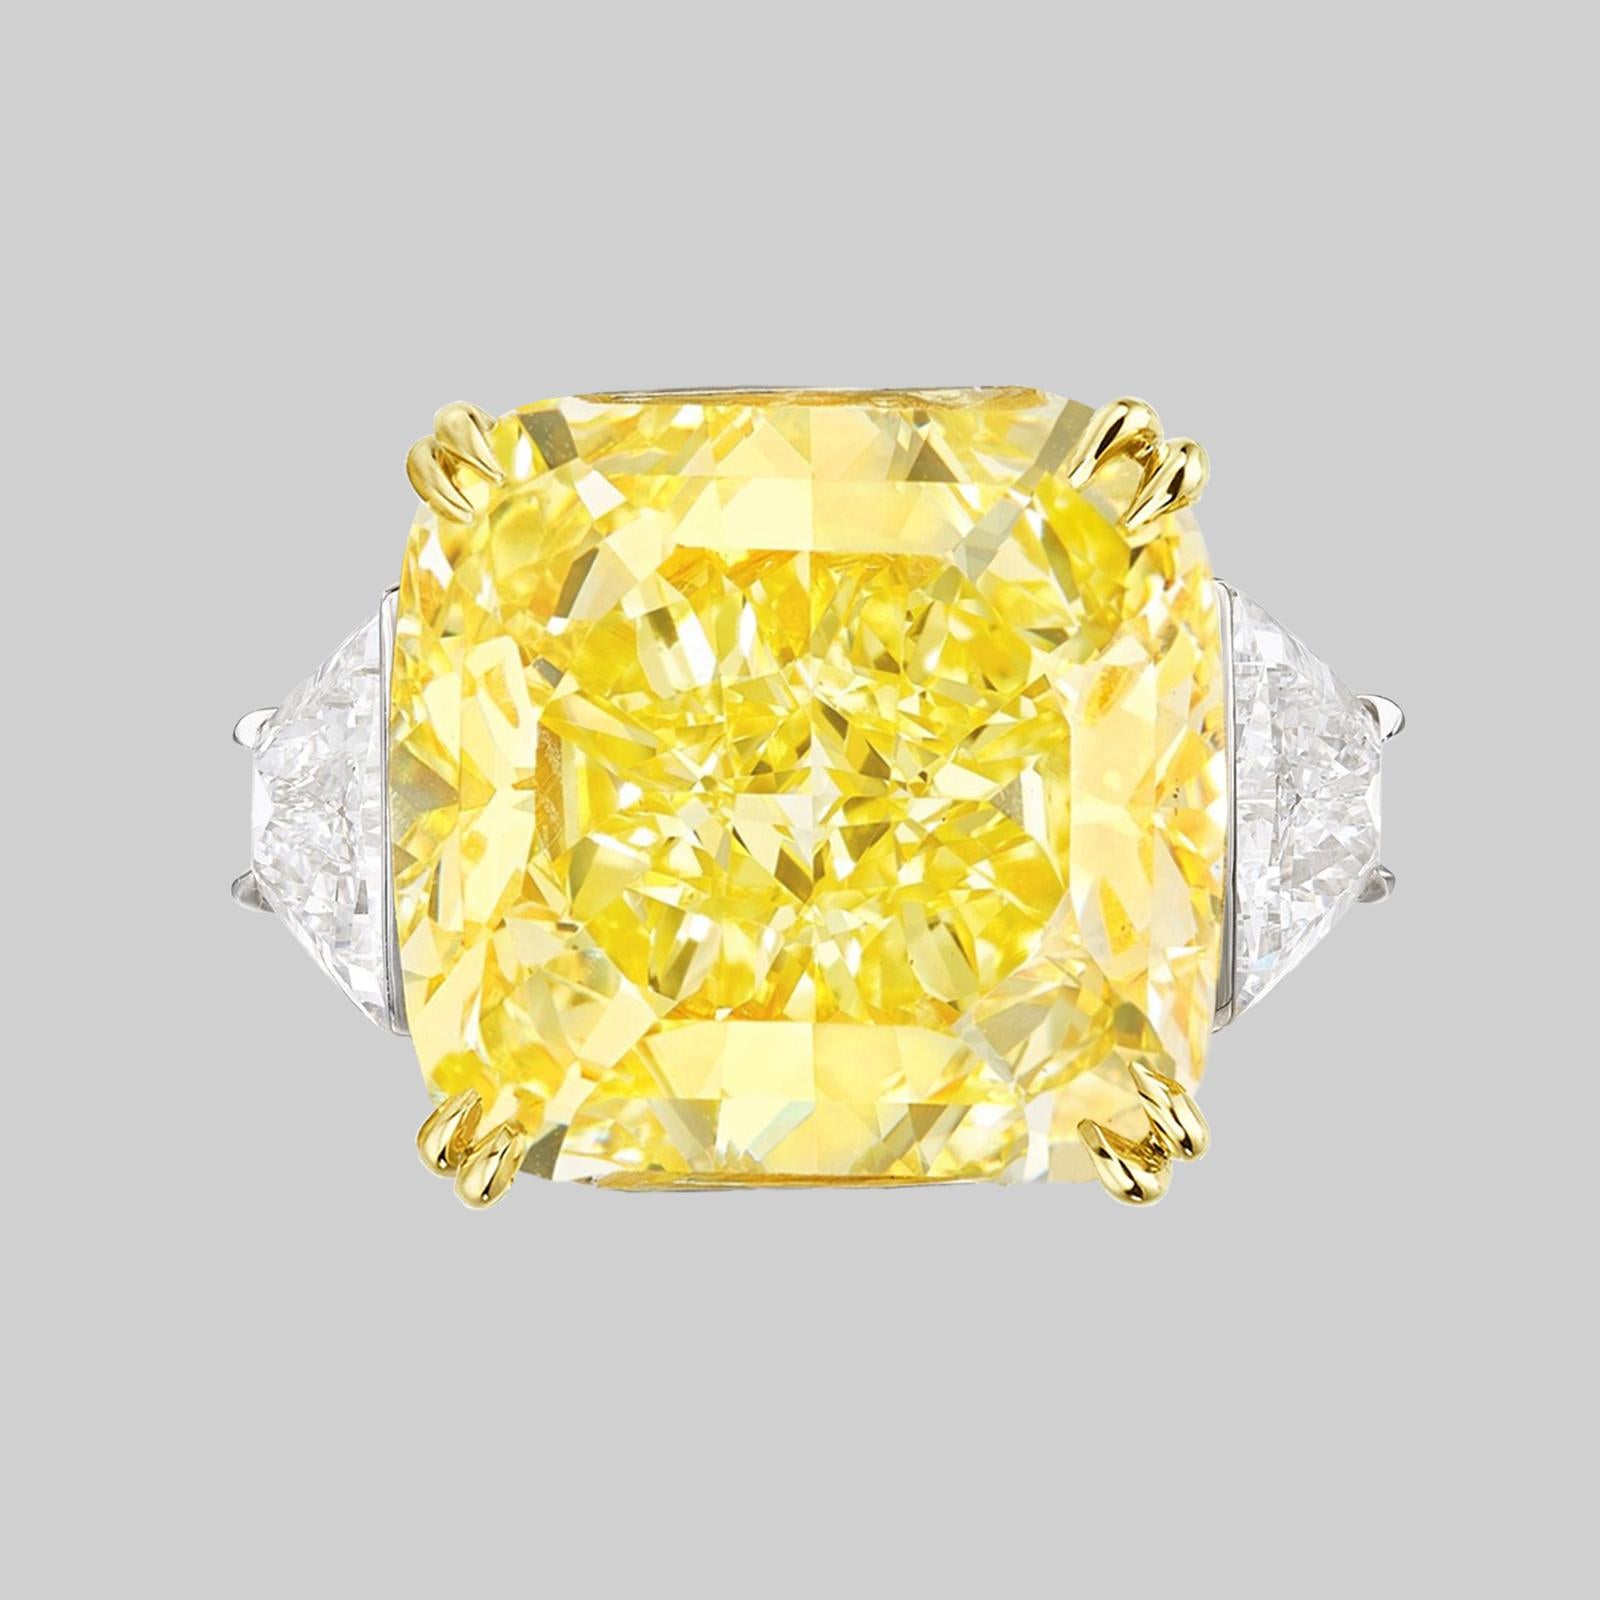 Magnificent radiant cut diamond ring  Speechless 23 Carats Fancy VIVID Yellow Cushion Cut VS2 in clarity. Certified by GIA set with 2 Carats of two impressive trapezoid diamonds set in Platinum and 18 carats Yellow Gold

Centering a stunning 23